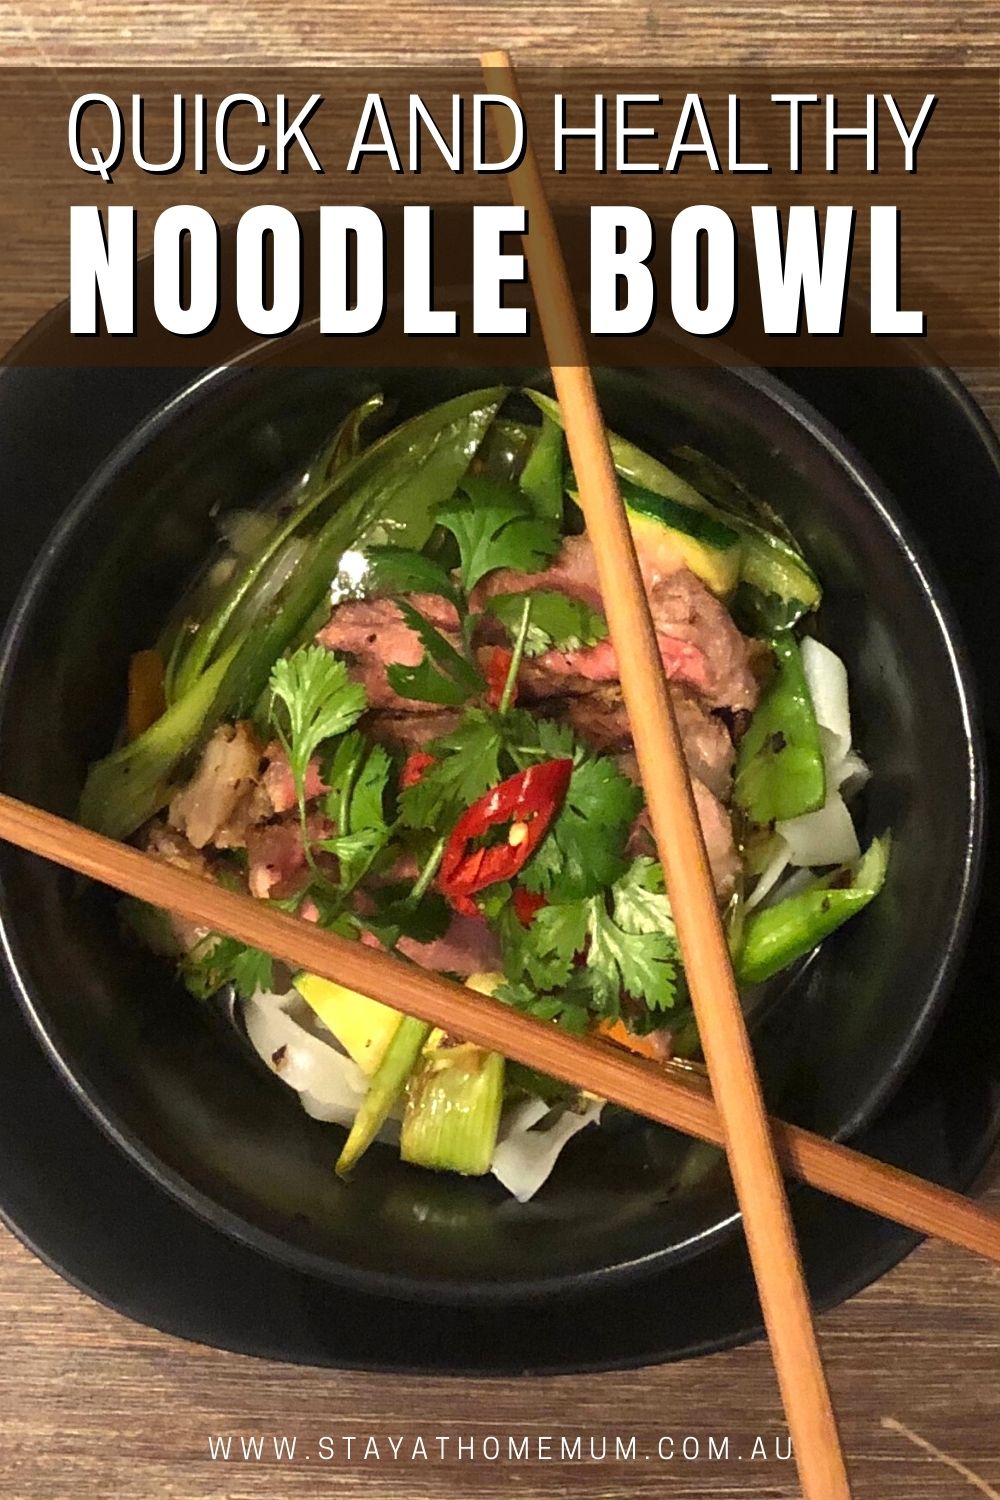 Quick and Healthy Noodle Bowl | Stay at Home Mum